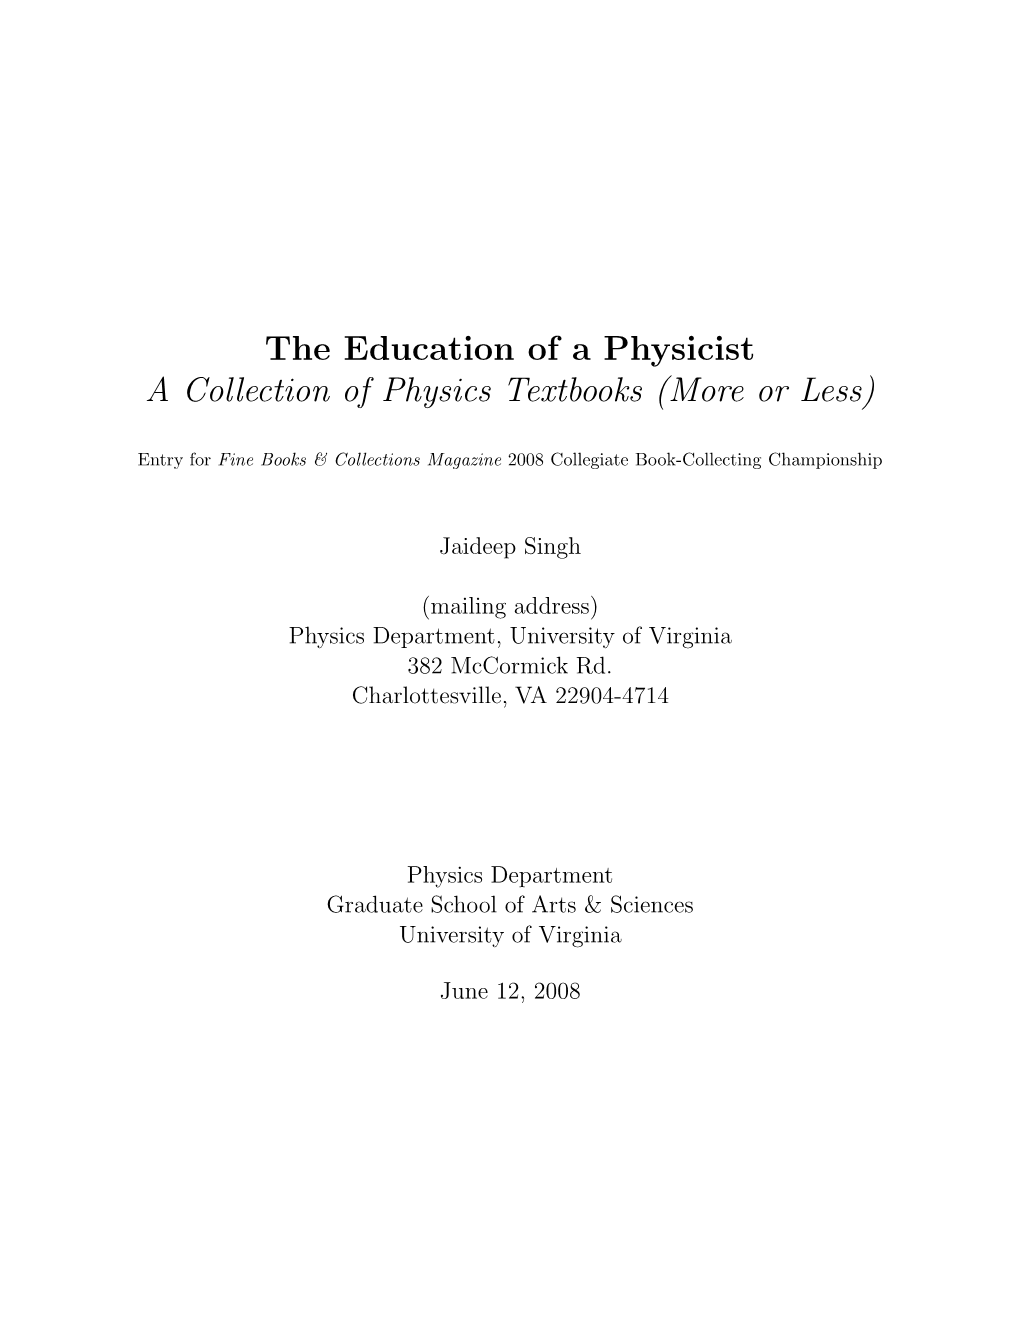 The Education of a Physicist a Collection of Physics Textbooks (More Or Less)